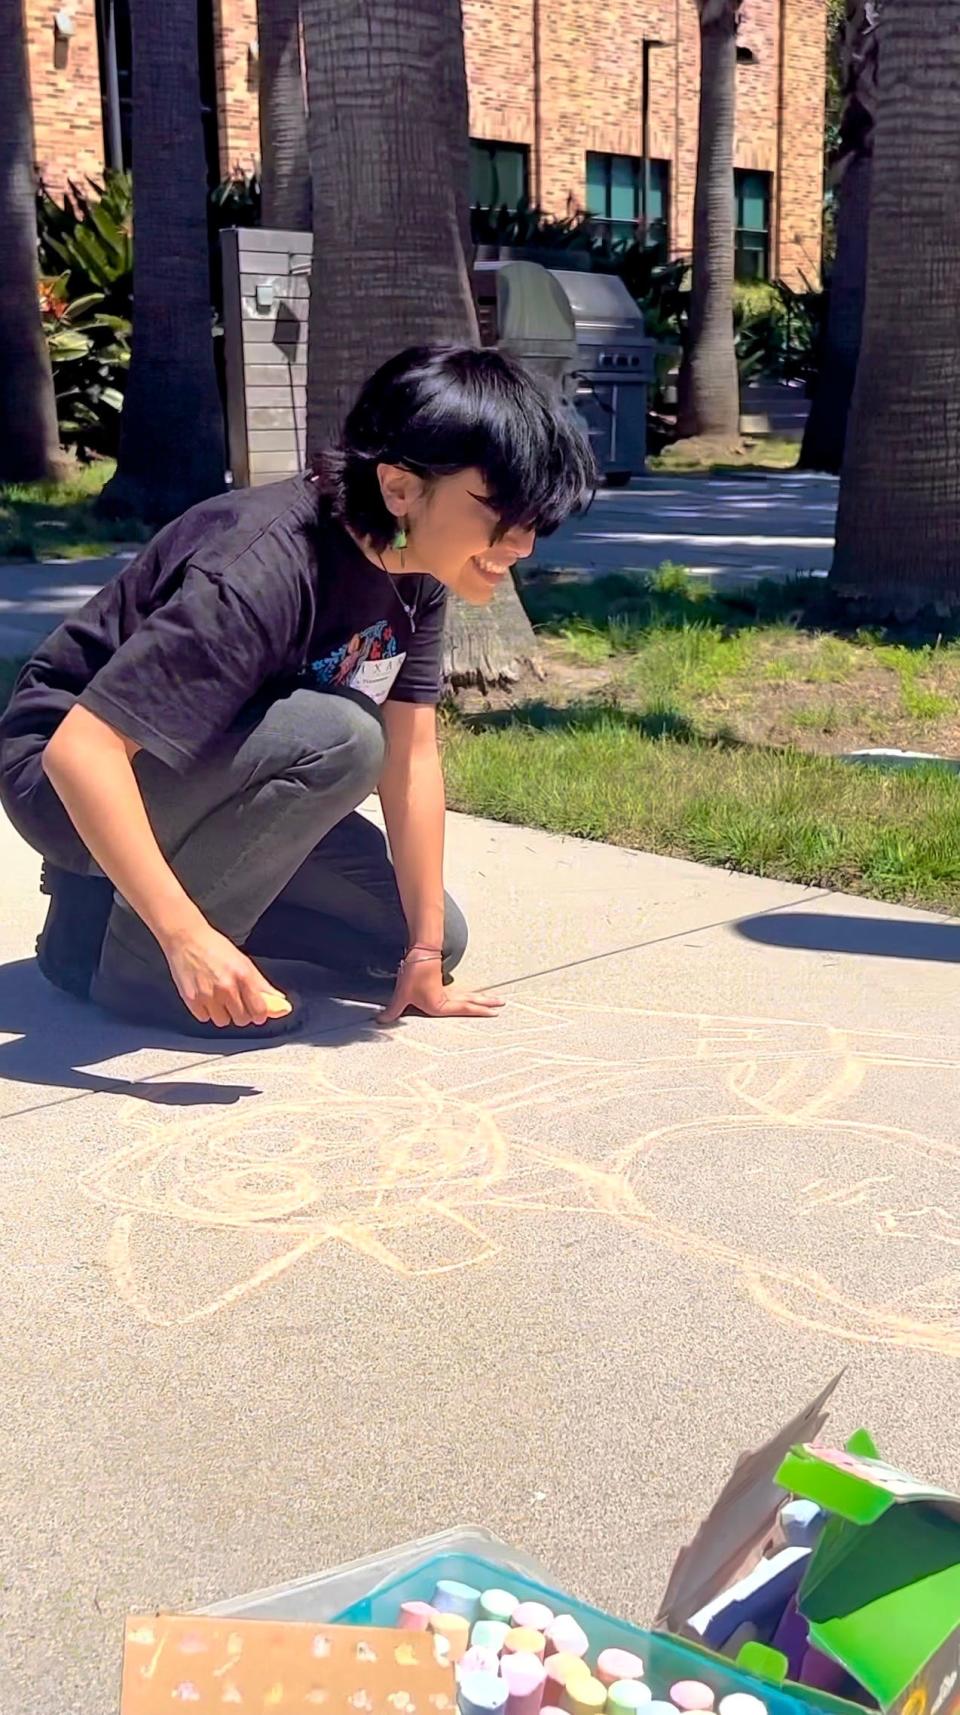 Jessie Plascencia with her chalk drawings